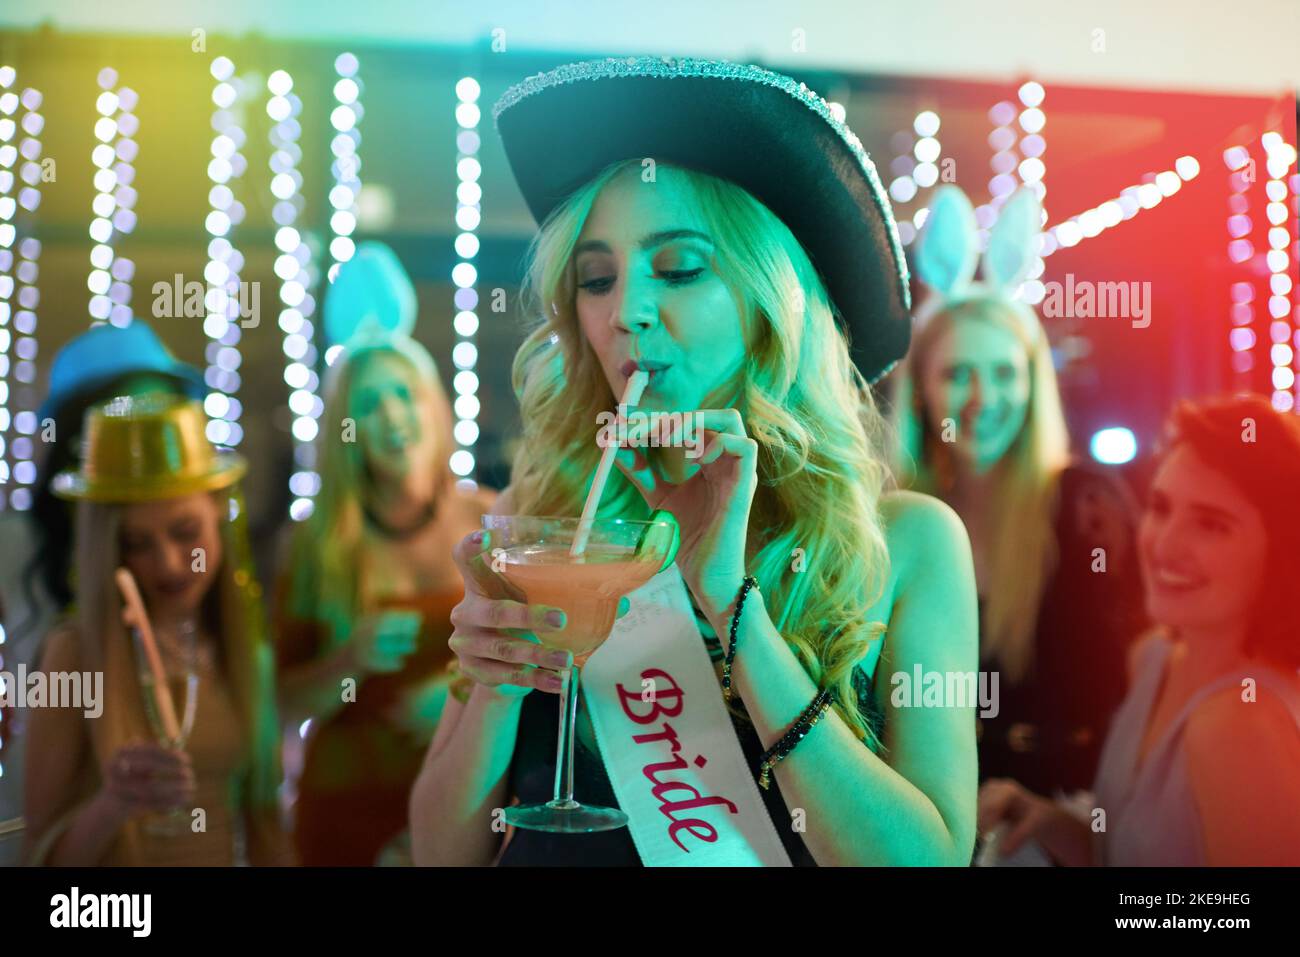 One last sip of the single life. a young woman drinking a cocktail at her bachelorette party. Stock Photo